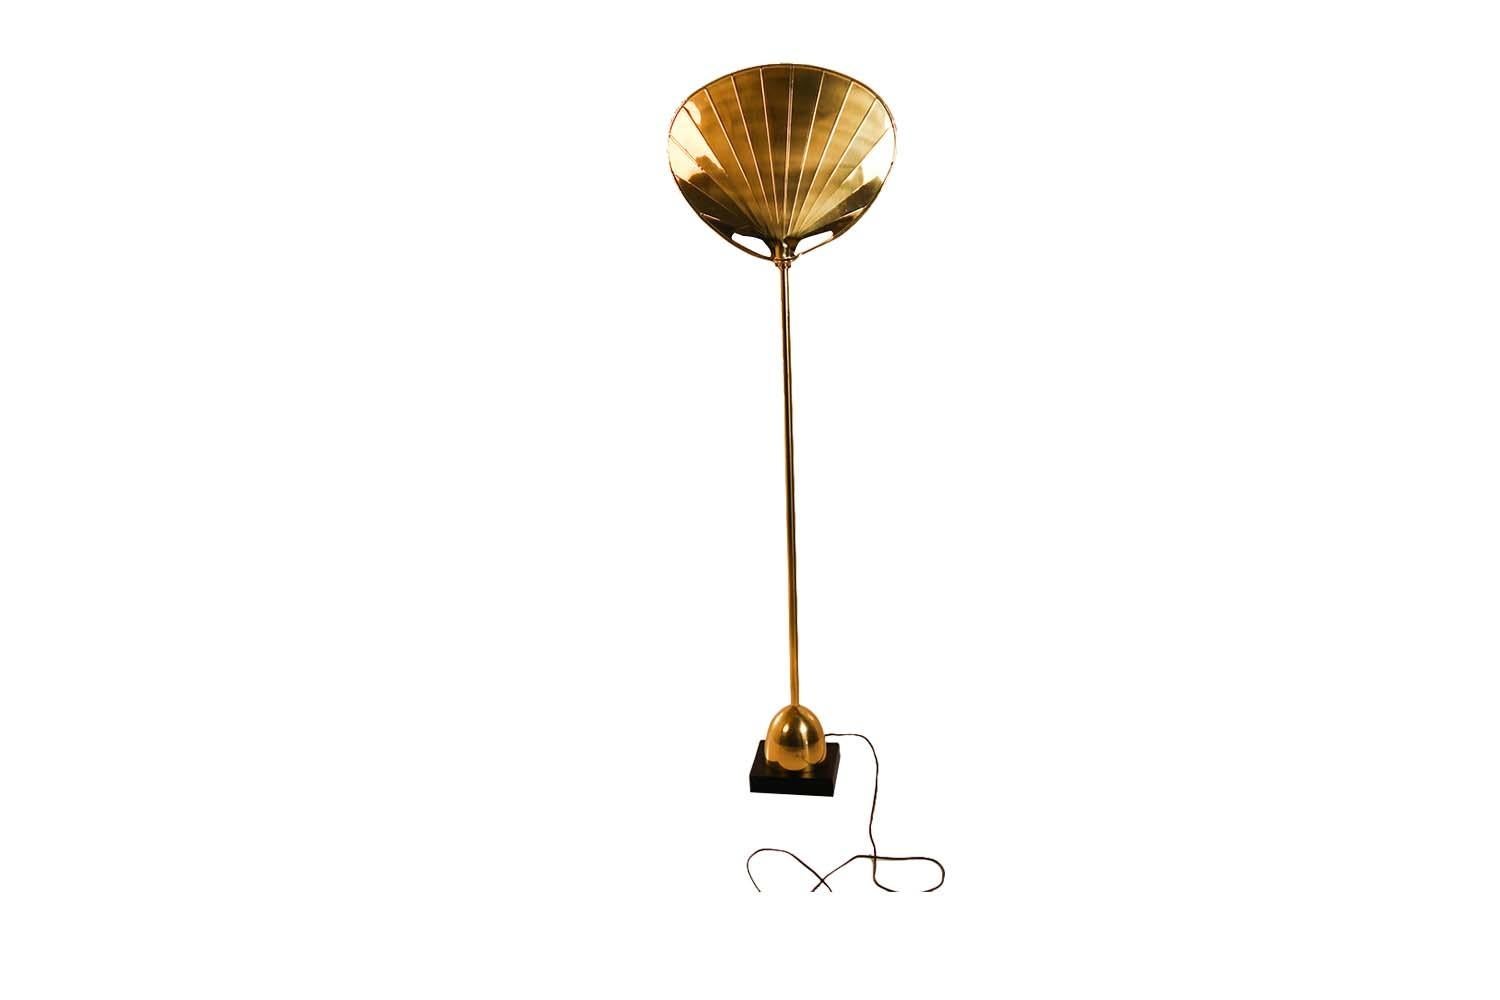 This is an absolutely extraordinary, palm leaf floor lamp by Chapman, superior craftsmanship, circa 1979. Features a tall slender brass column raised on a brass dome with a supporting ebonized plinth base. The stylish palm leaf shade provides subtle